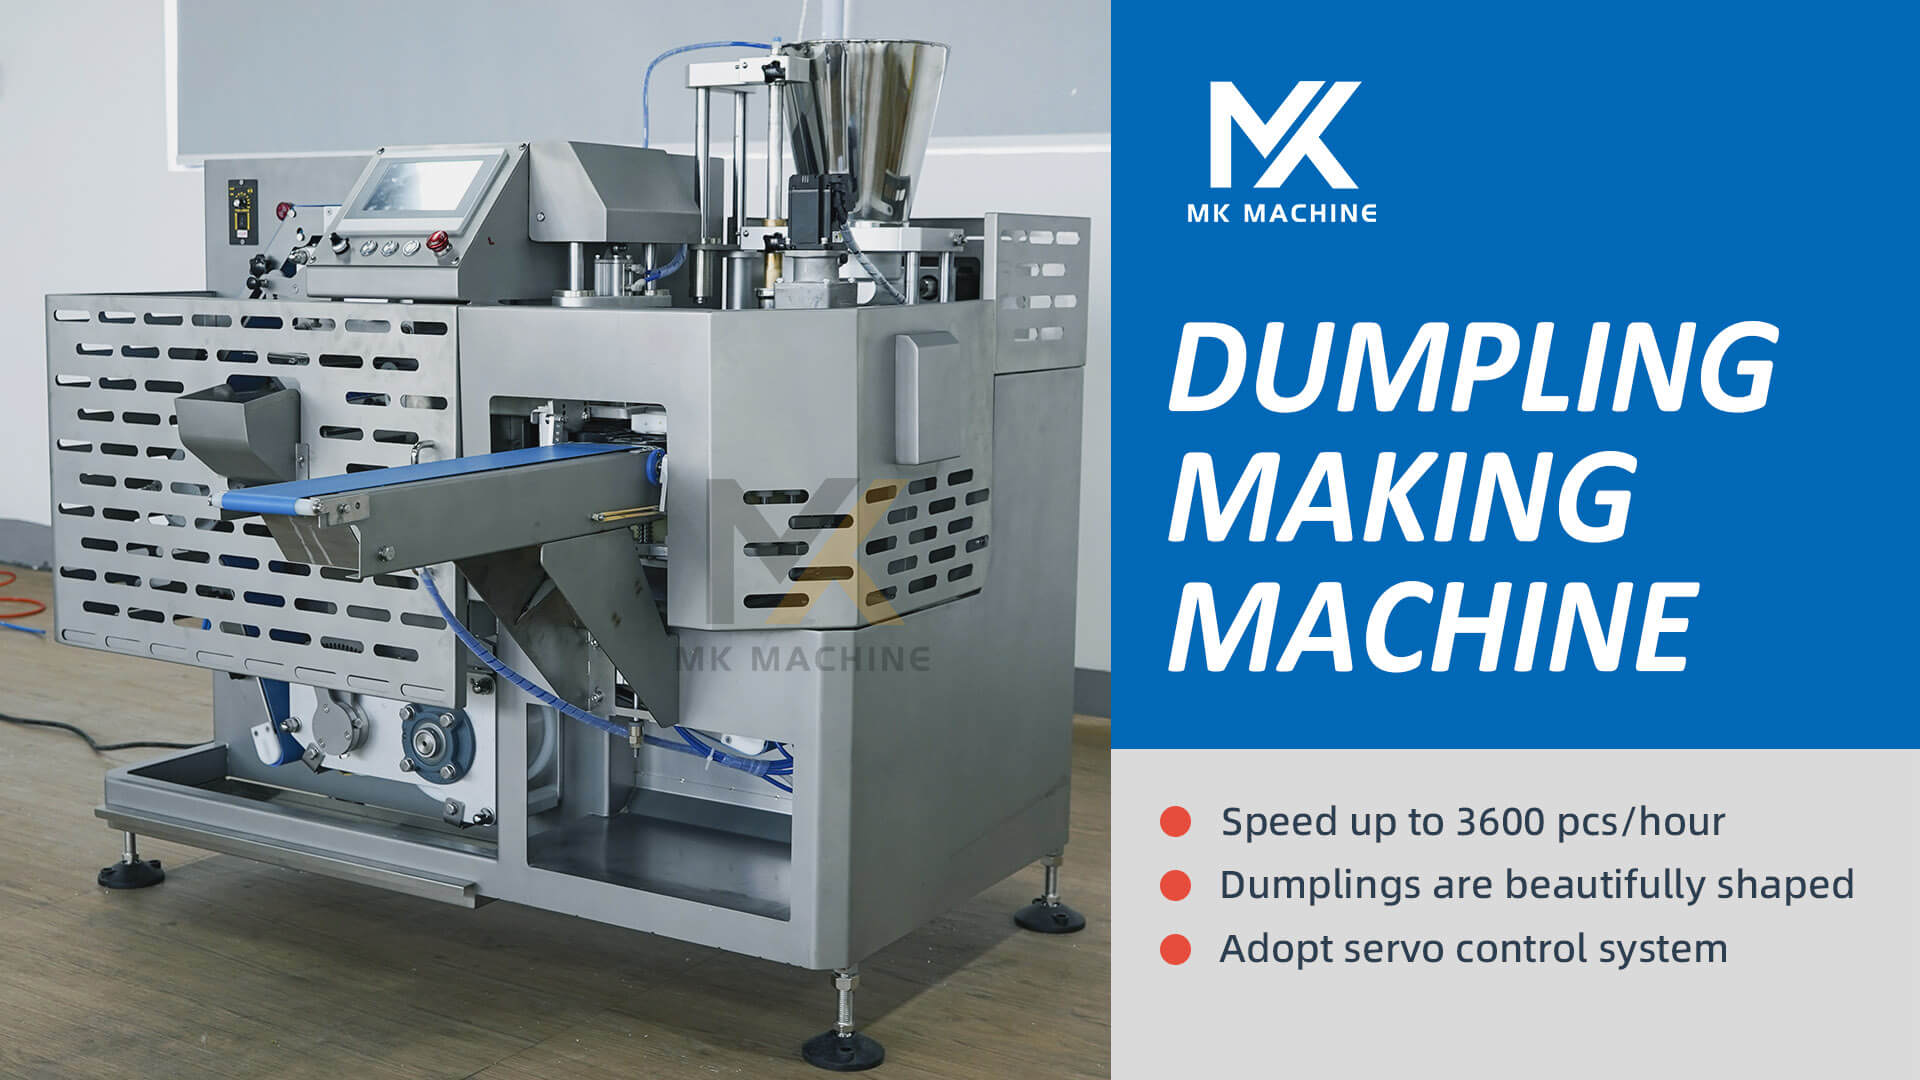 Automatic dumpling making machine fast production in factories and restaurants